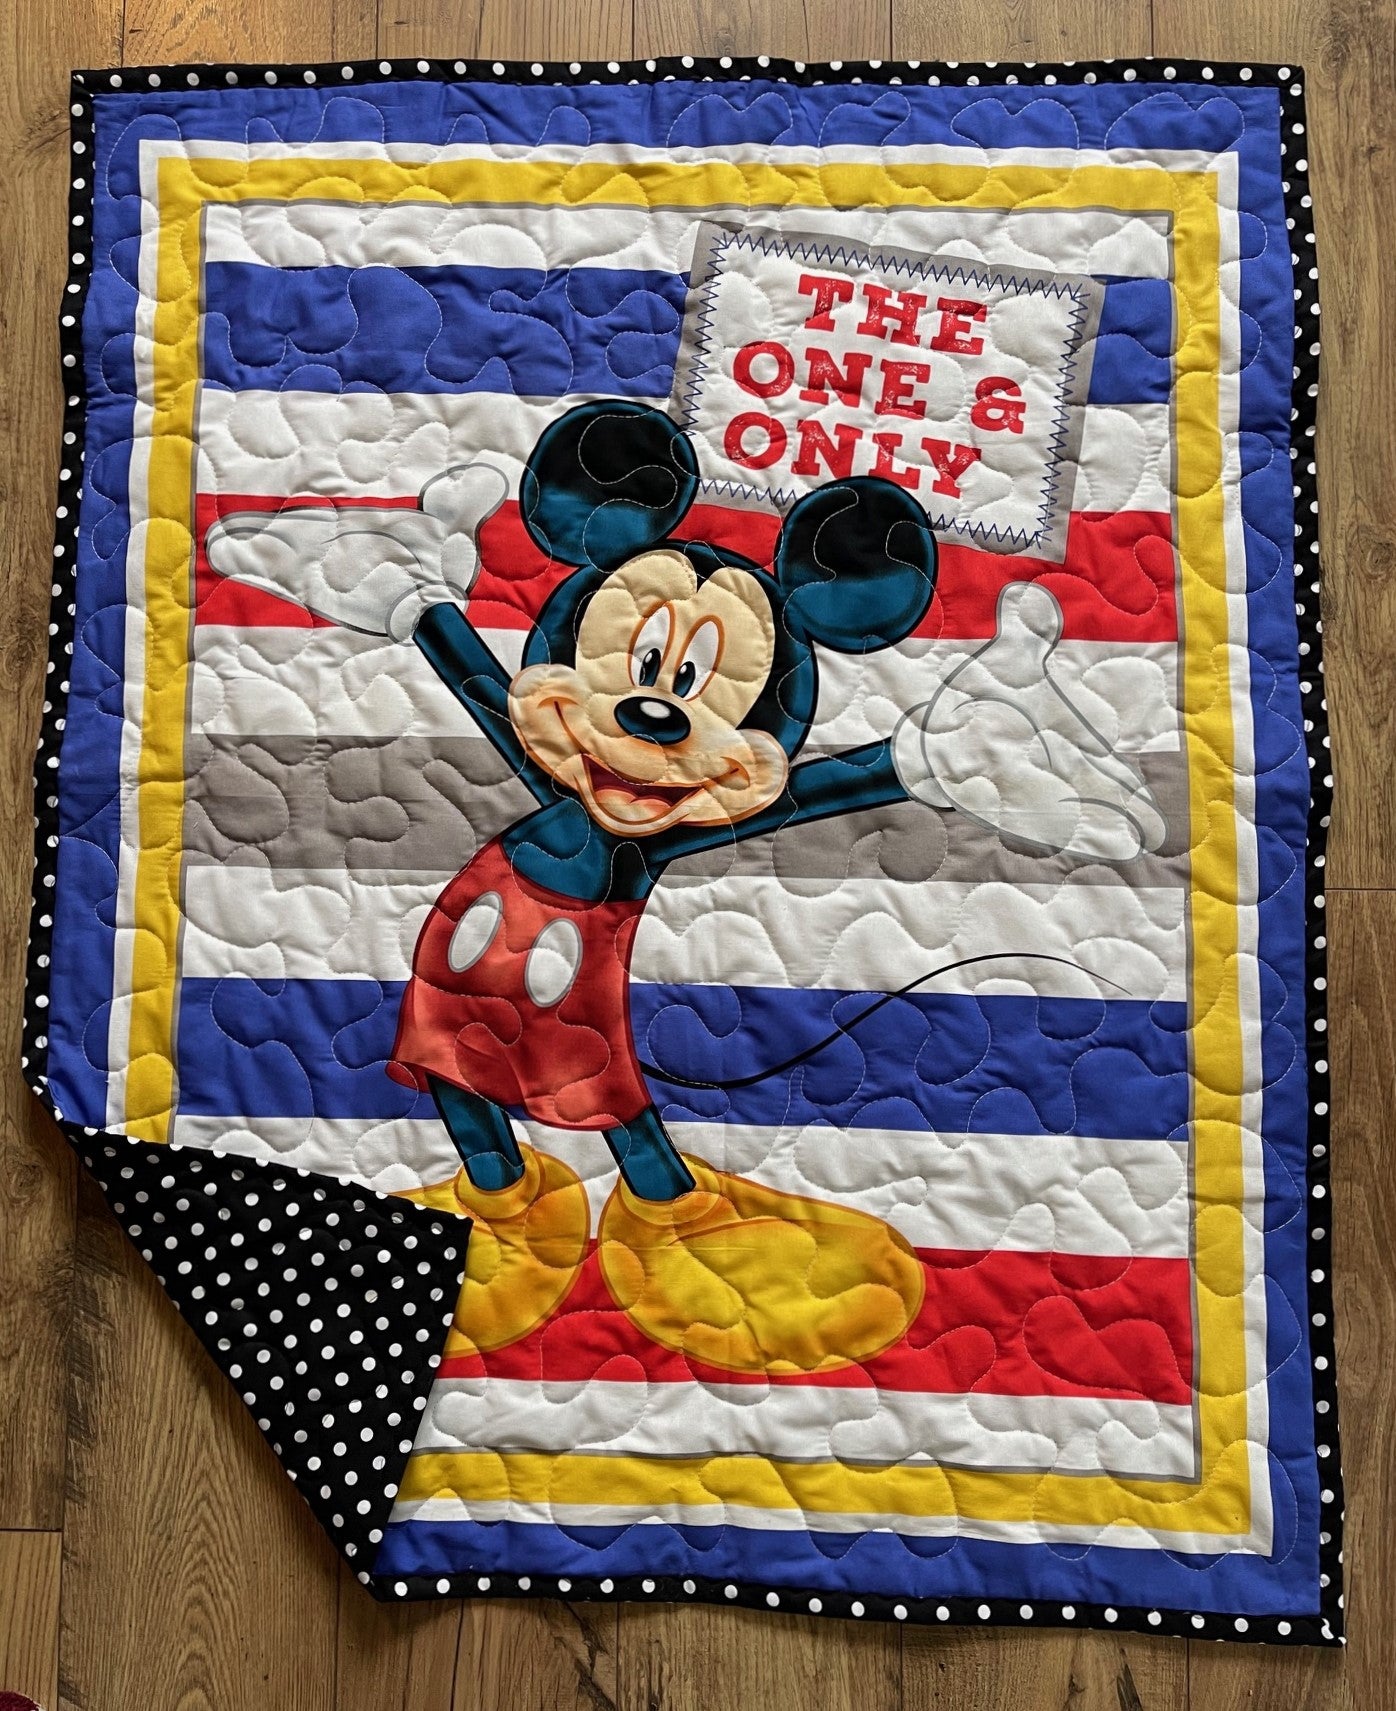 DISNEY MICKEY MOUSE INSPIRED *THE ONE AND ONLY* QUILTED BLANKET